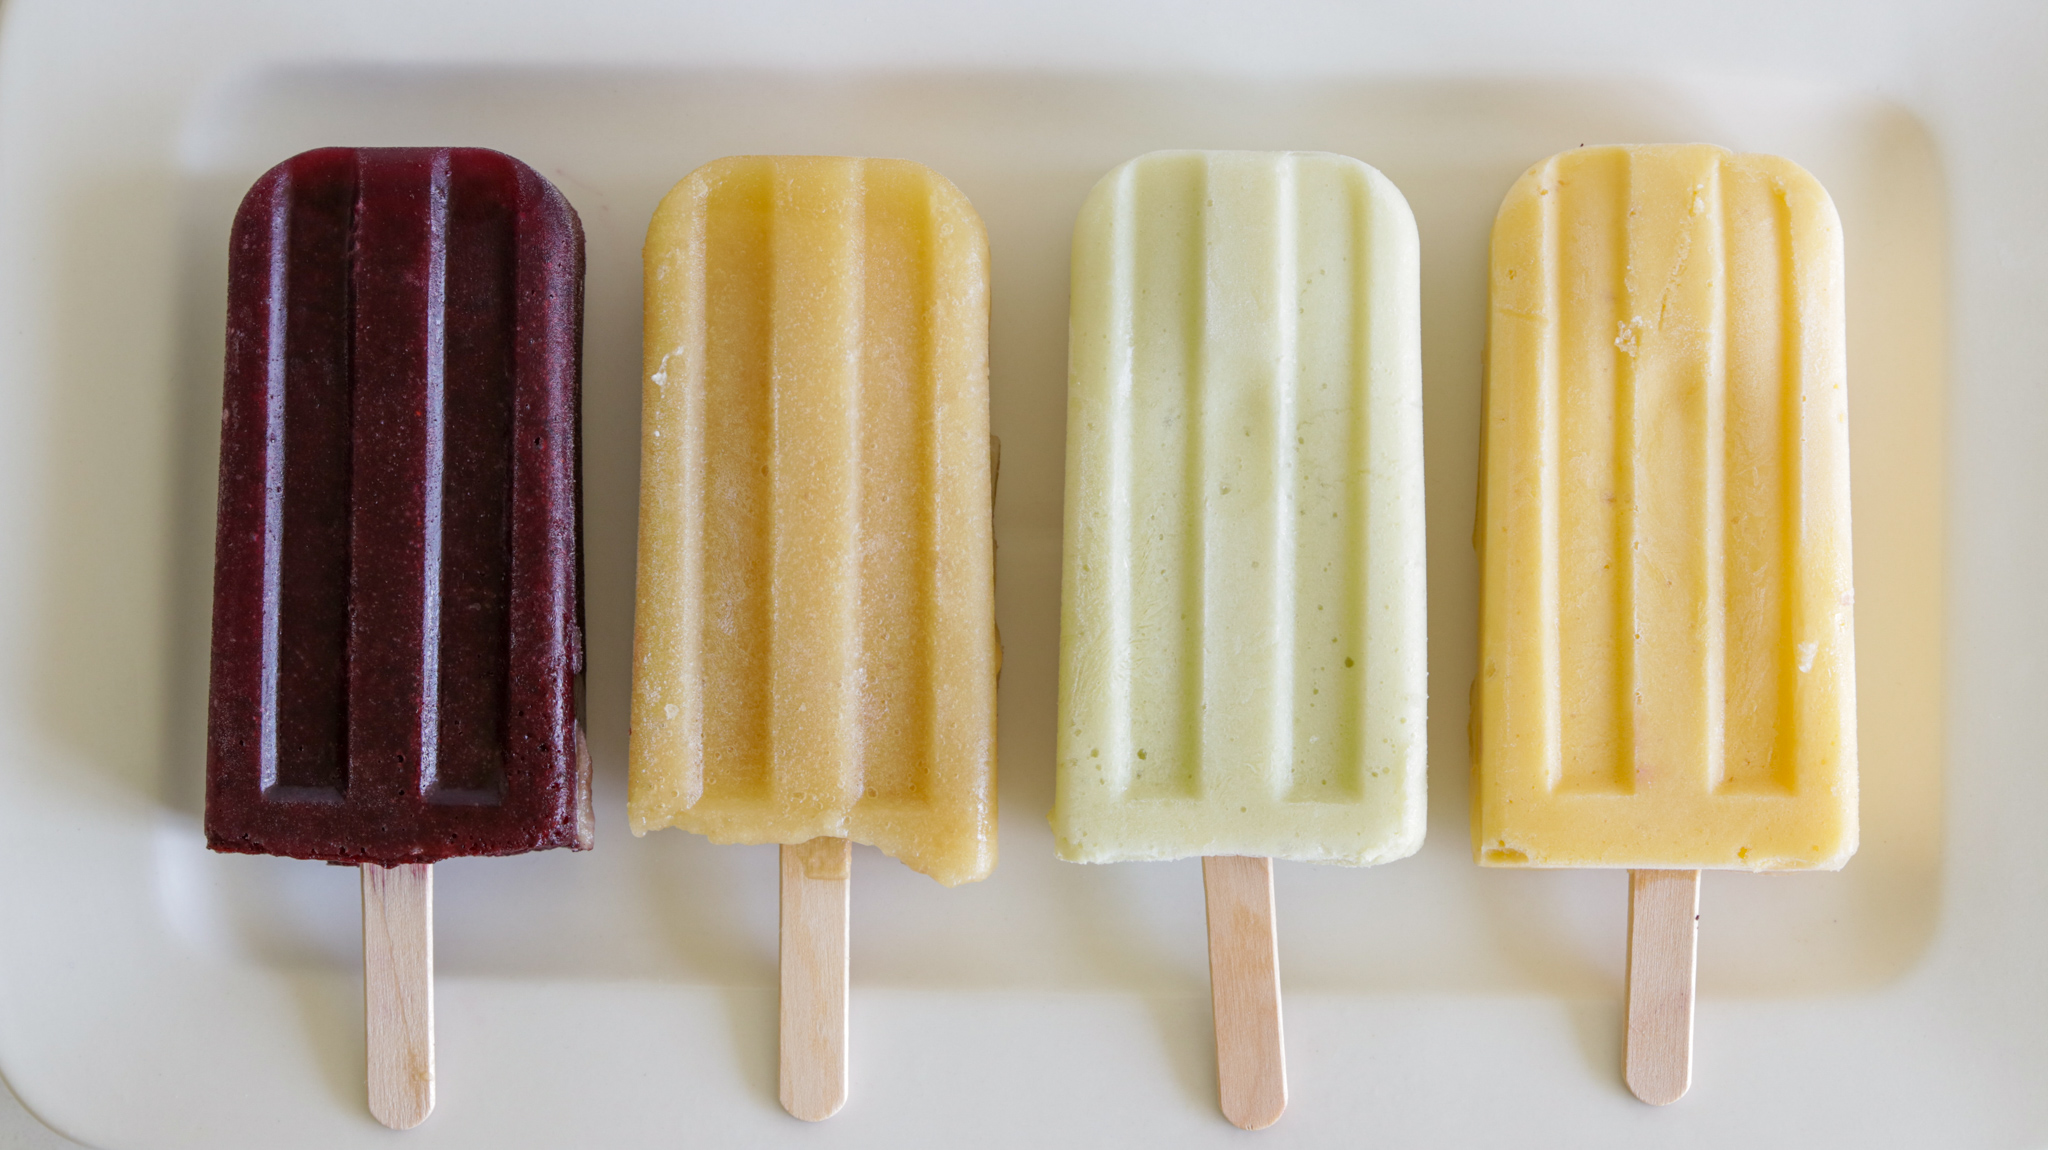 4 Healthy Popsicles Recipes for Hot Summer Days